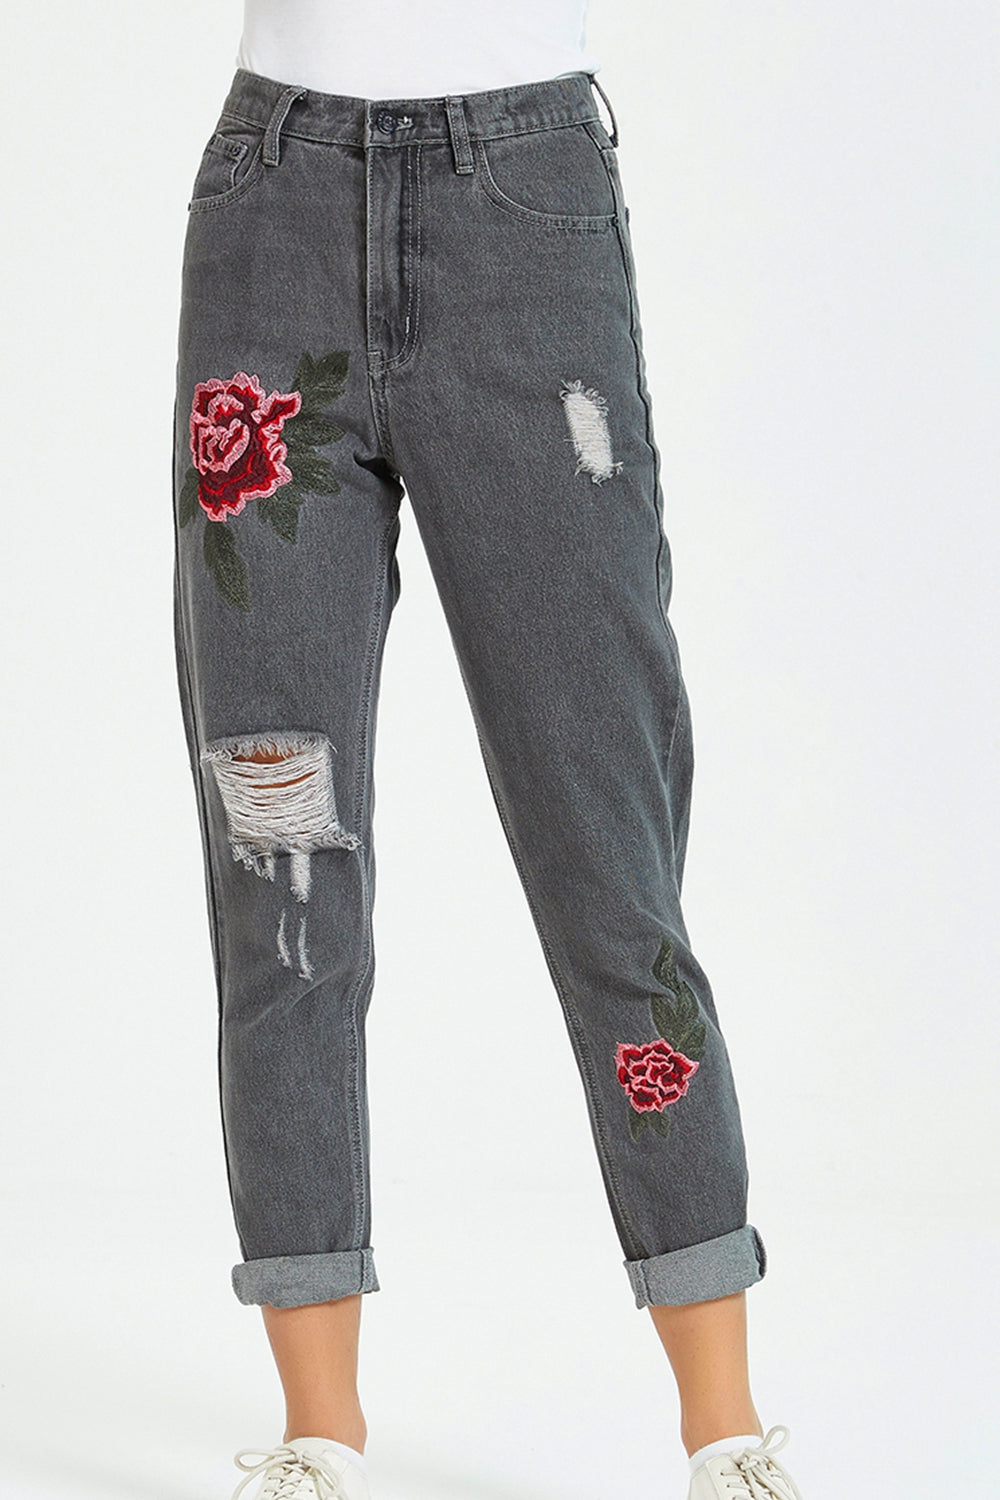 Women’s Flower Embroidery Distressed Jeans